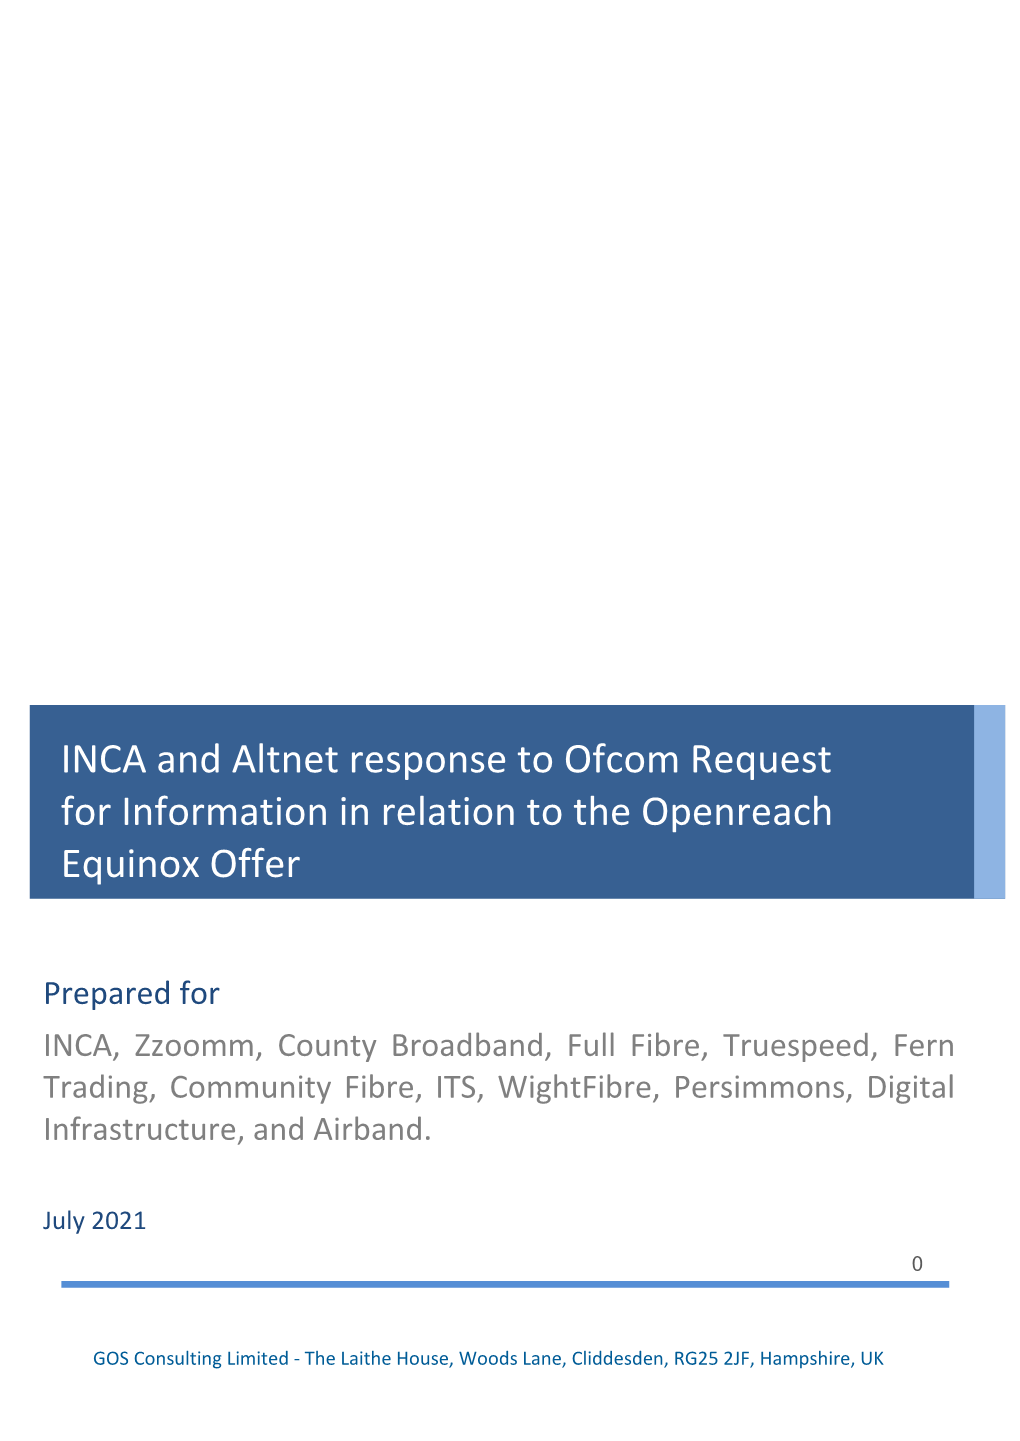 INCA and Altnet Response to Ofcom Request for Information in Relation to the Openreach Equinox Offer